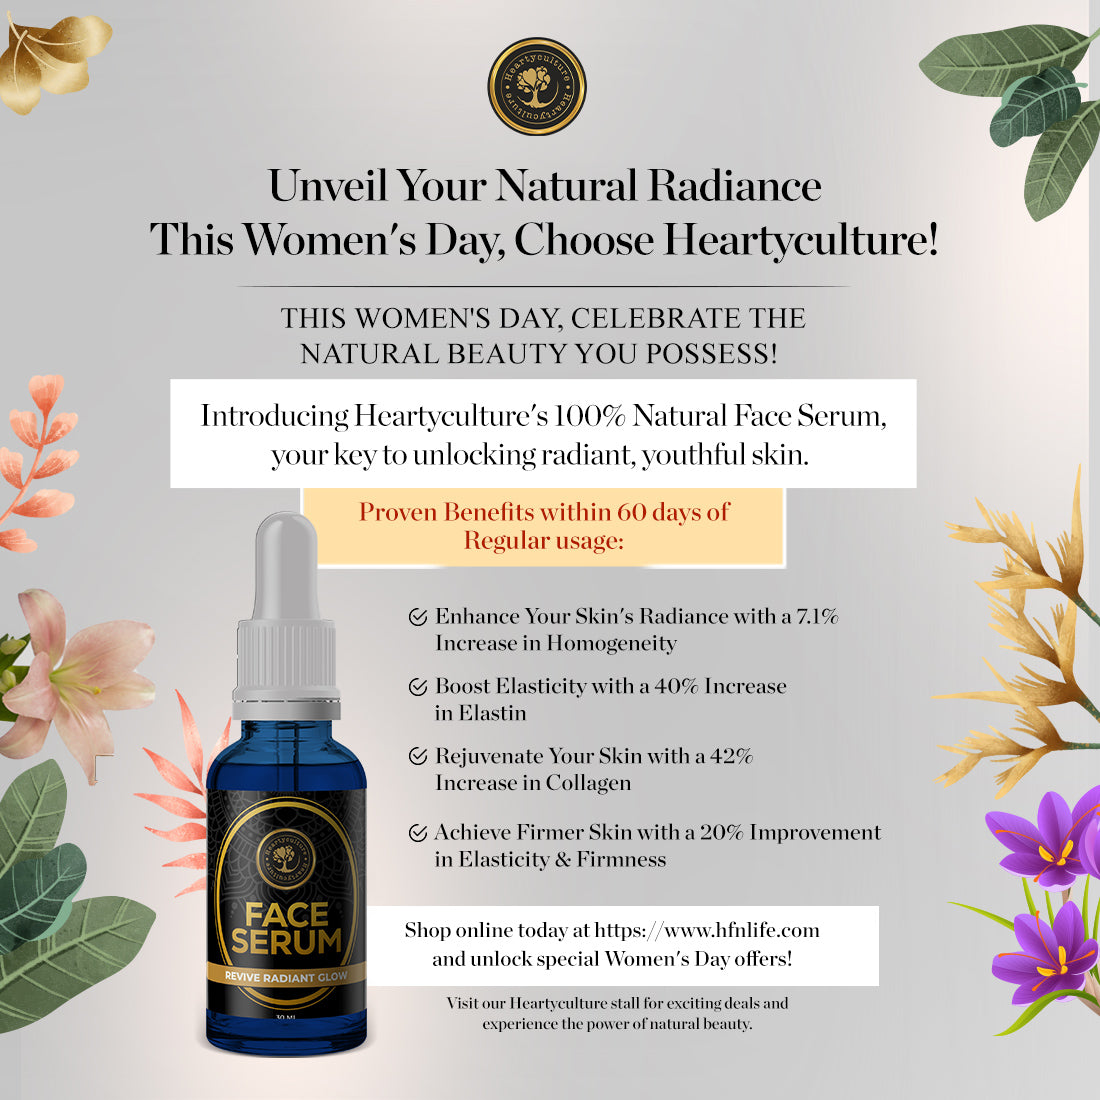 Heartyculture Face Serum Unleash Your Natural Radiance: Discover Heartyculture's 100% Natural Face Serum!